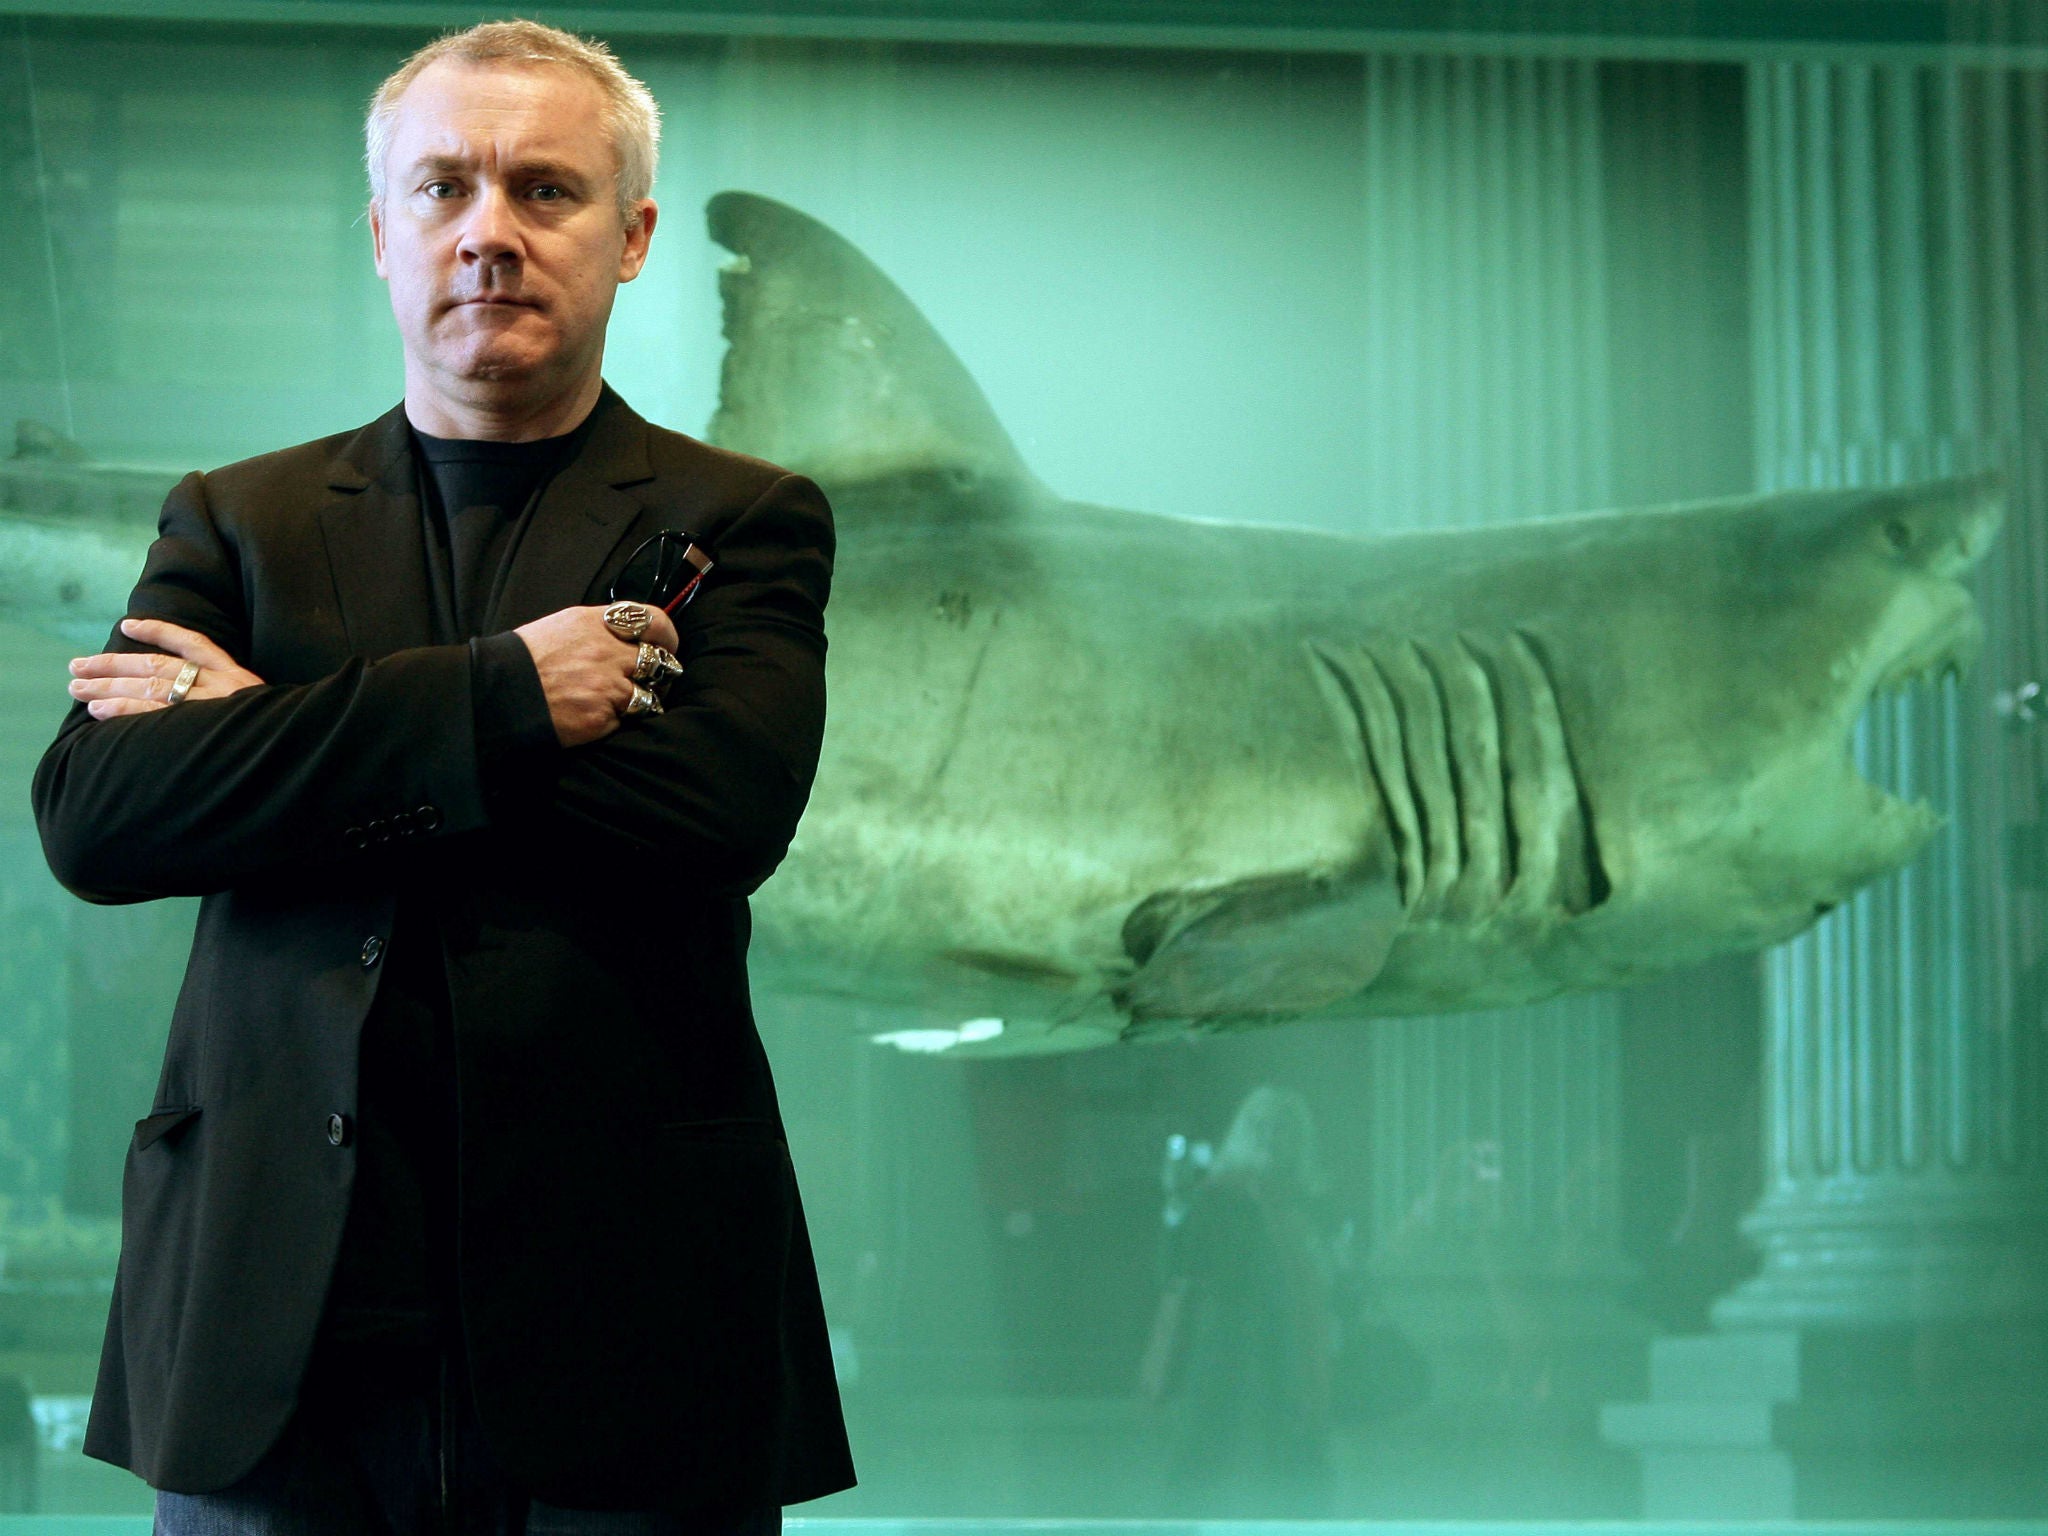 Damien Hirst chose to use formaldehyde 'to communicate an idea'